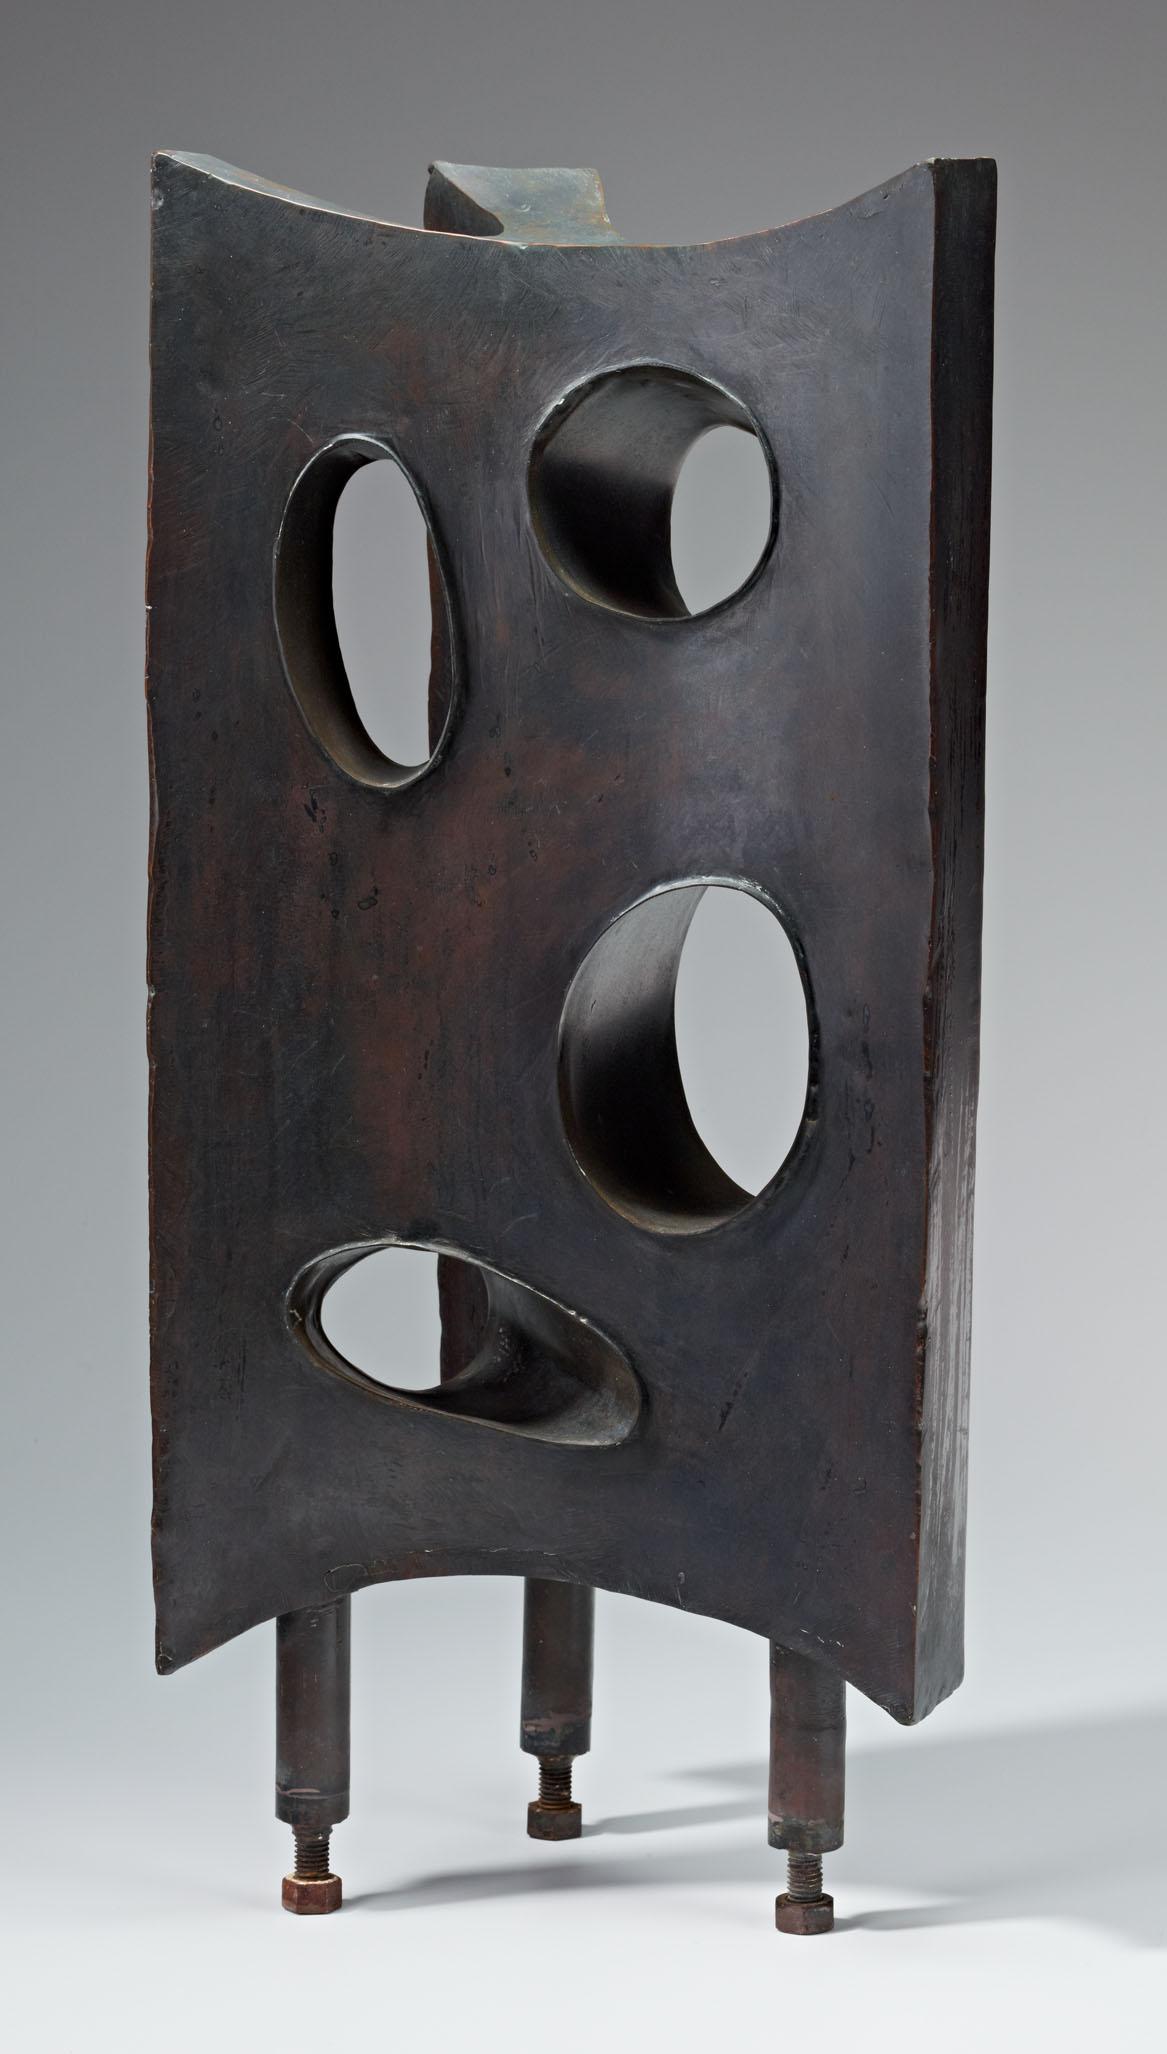 Working Metal in 20th-Century Sculpture | Cantor Arts Center Exhibitions